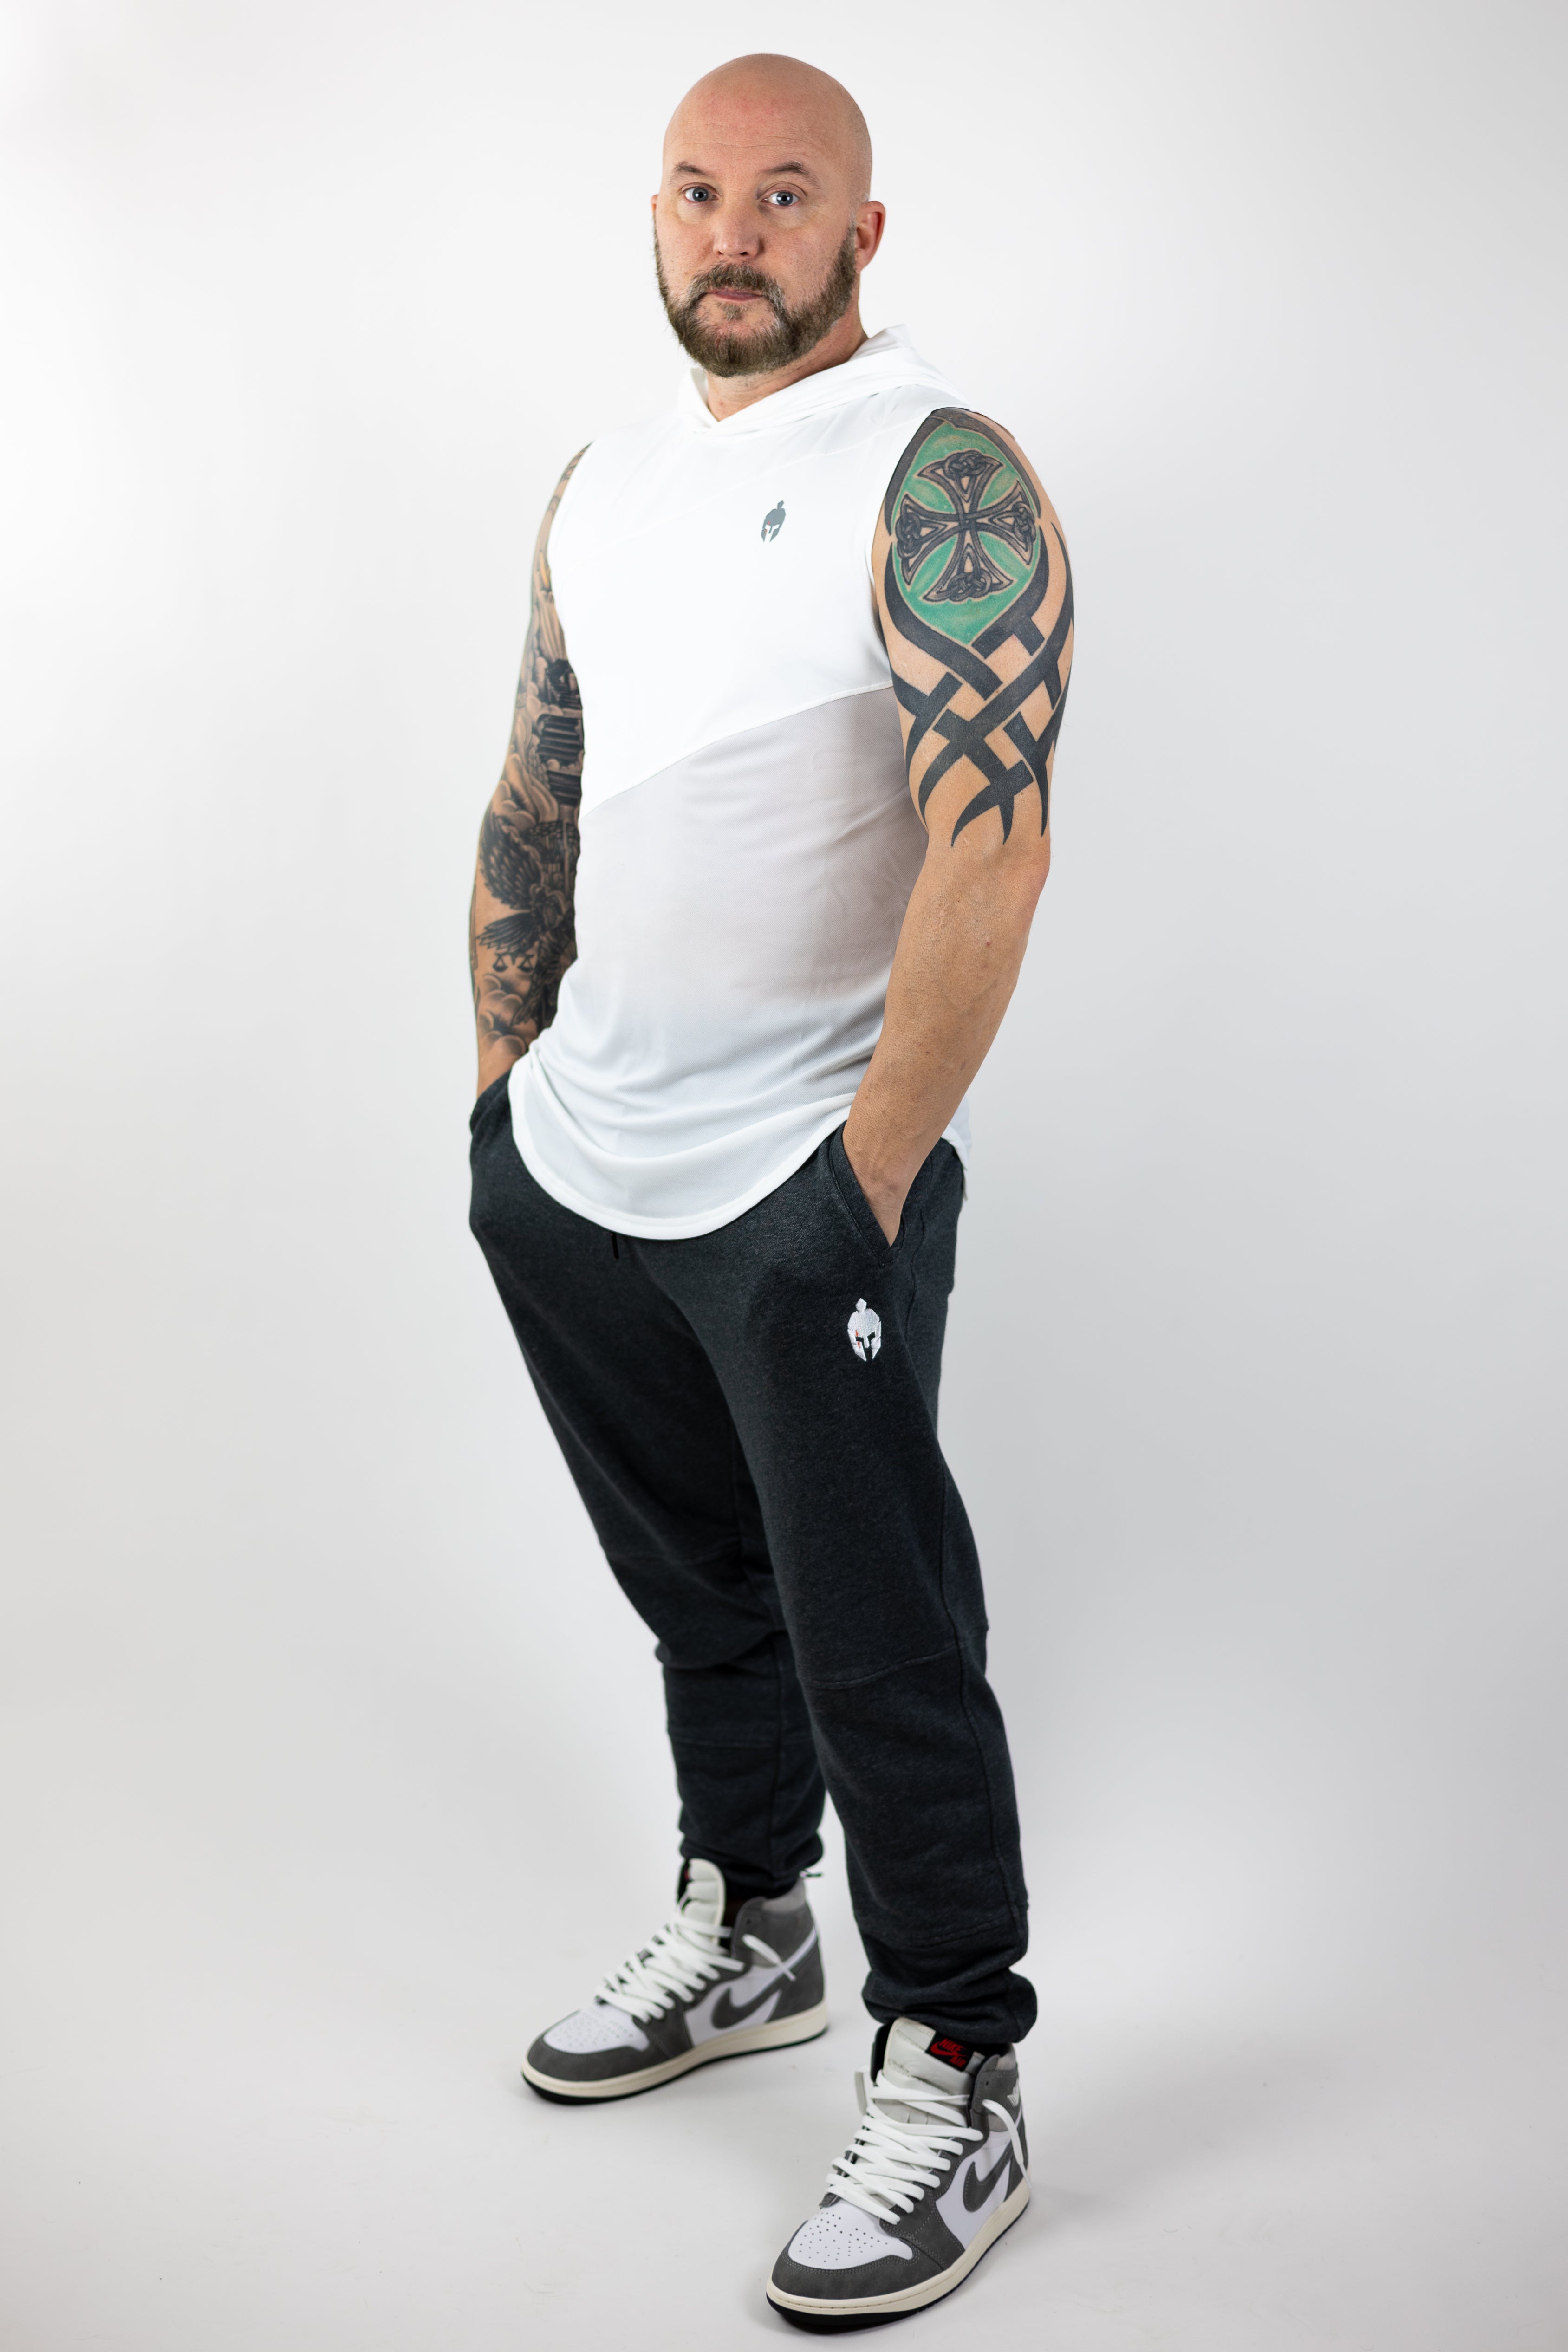 A man with tattoos on his arms stands confidently in a white Strength of One shirt and gray sweatpants, wearing high-top sneakers